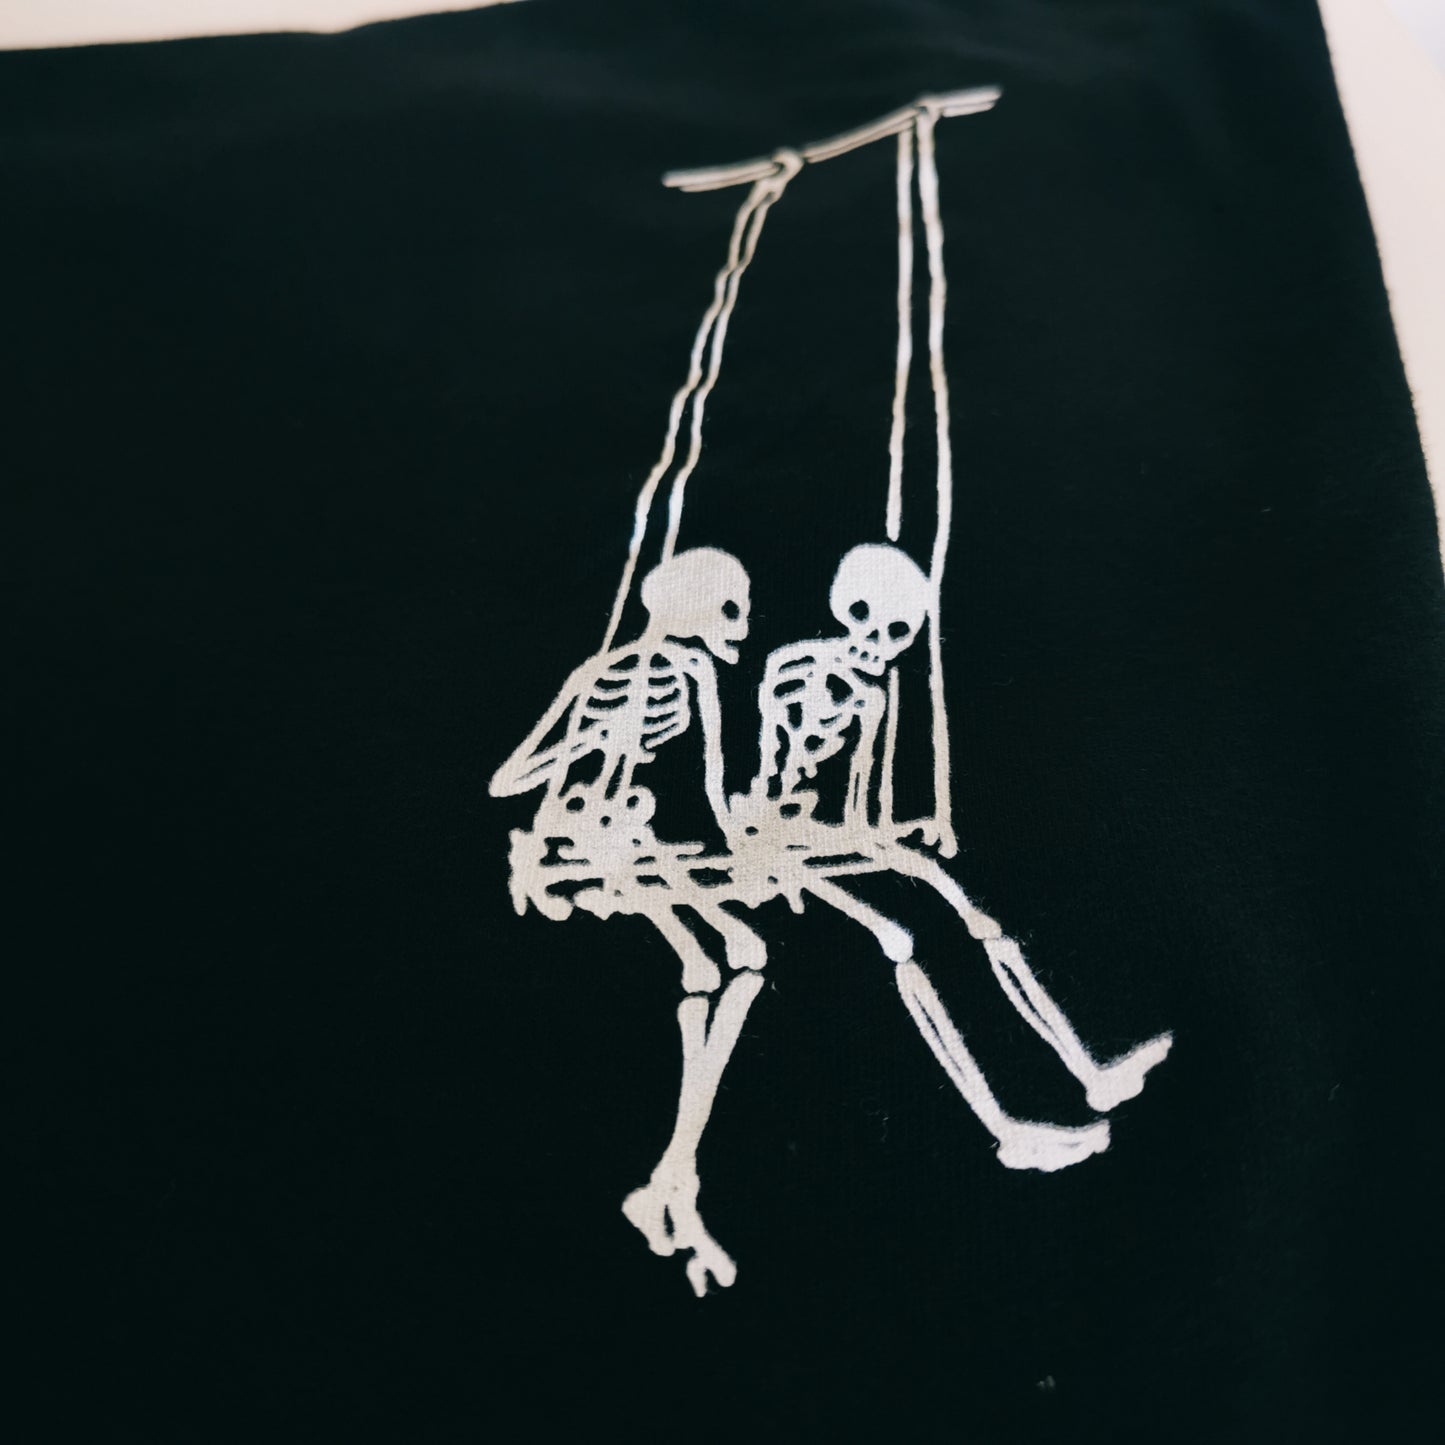 Two white skeletons on a swing, screen printed on a pocket of a gothic t-shirt. 